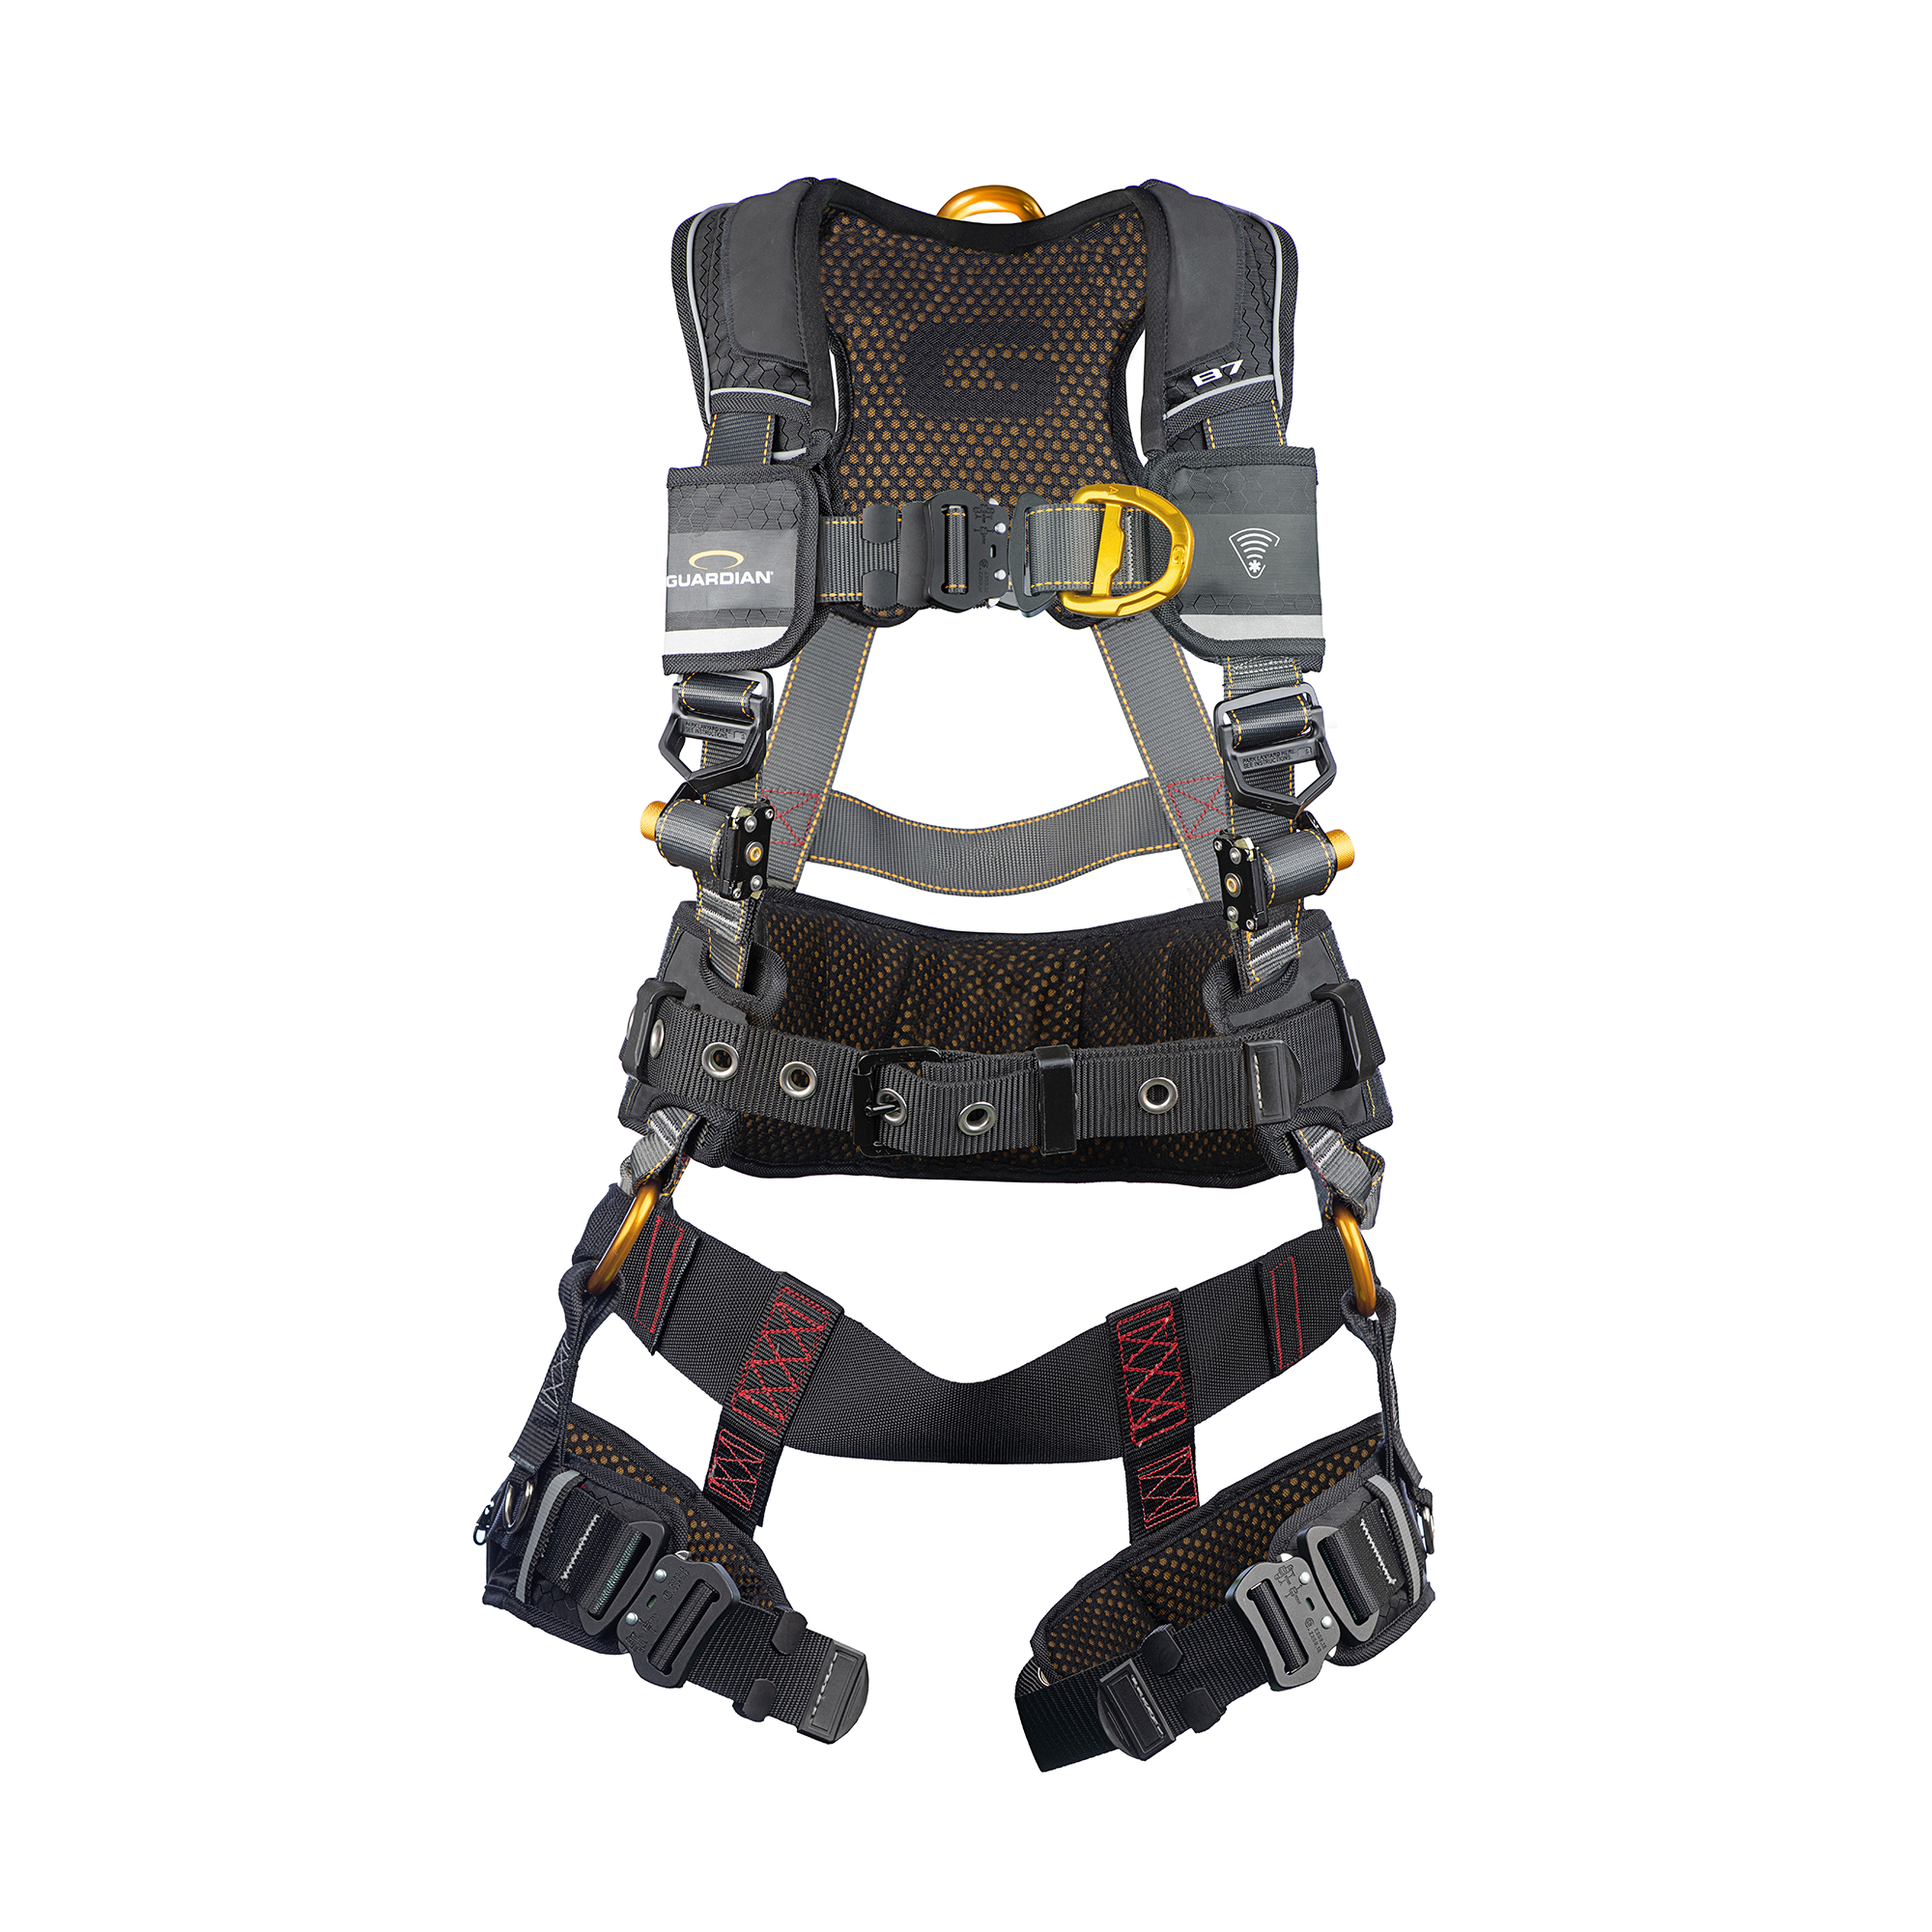 https://www.engineeredfallprotection.com/store/images/thumbs/0002761_guardian-b7-comfort-full-body-harness-w-waist-pad-quick-connect-chest-and-legs-sternal-d-ring.png